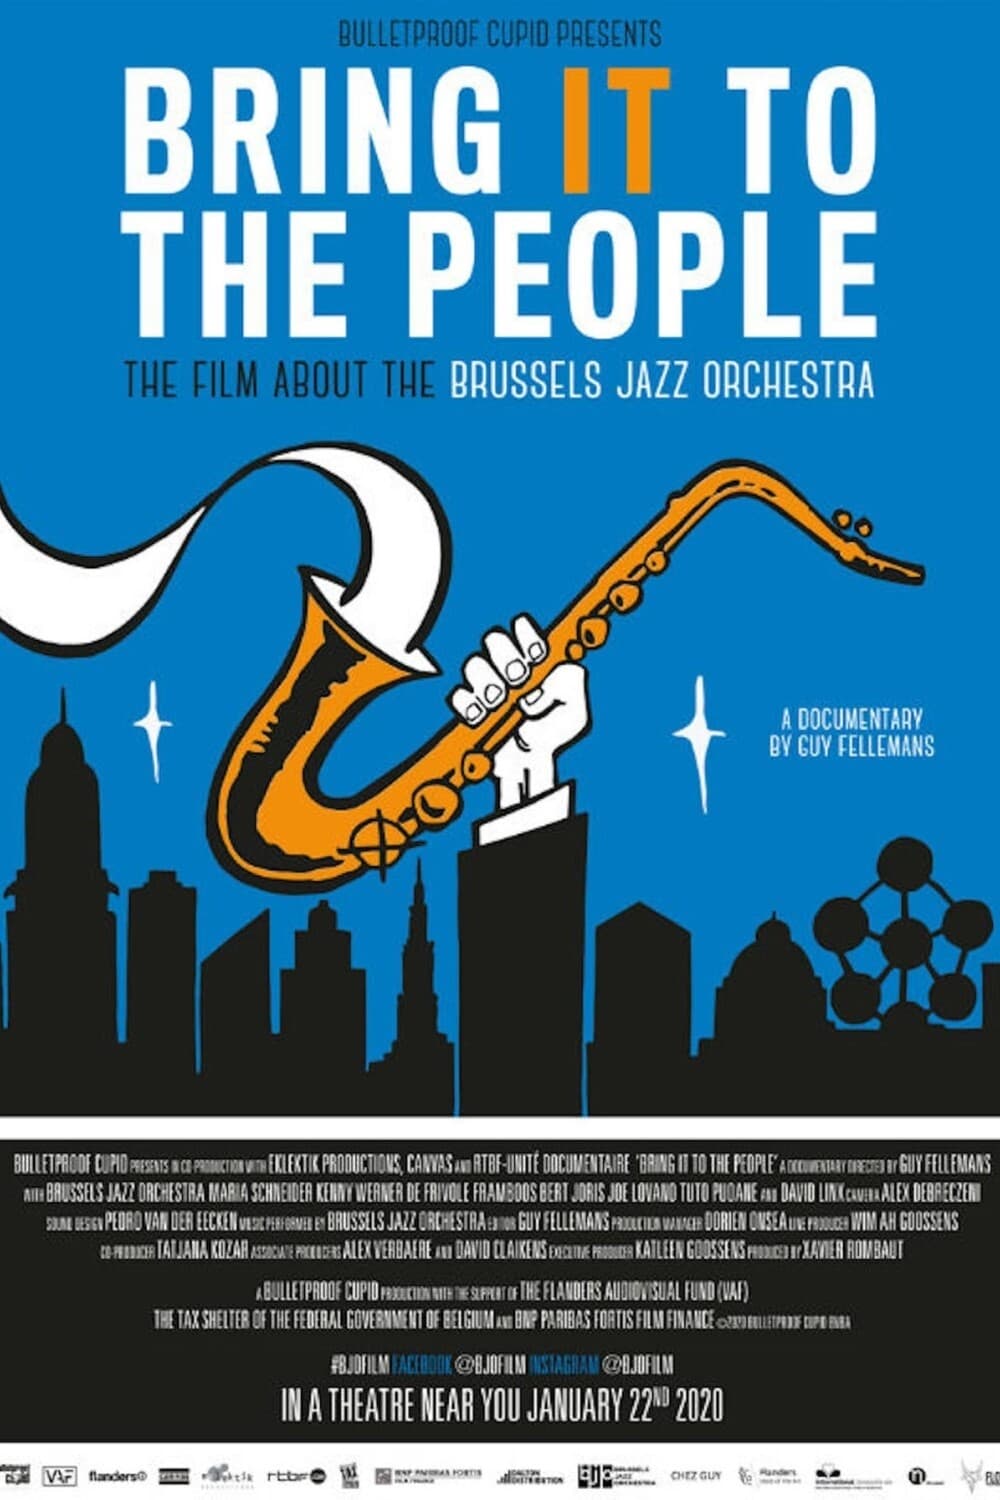 Bring It to the People - the film about the Brussels Jazz Orchestra